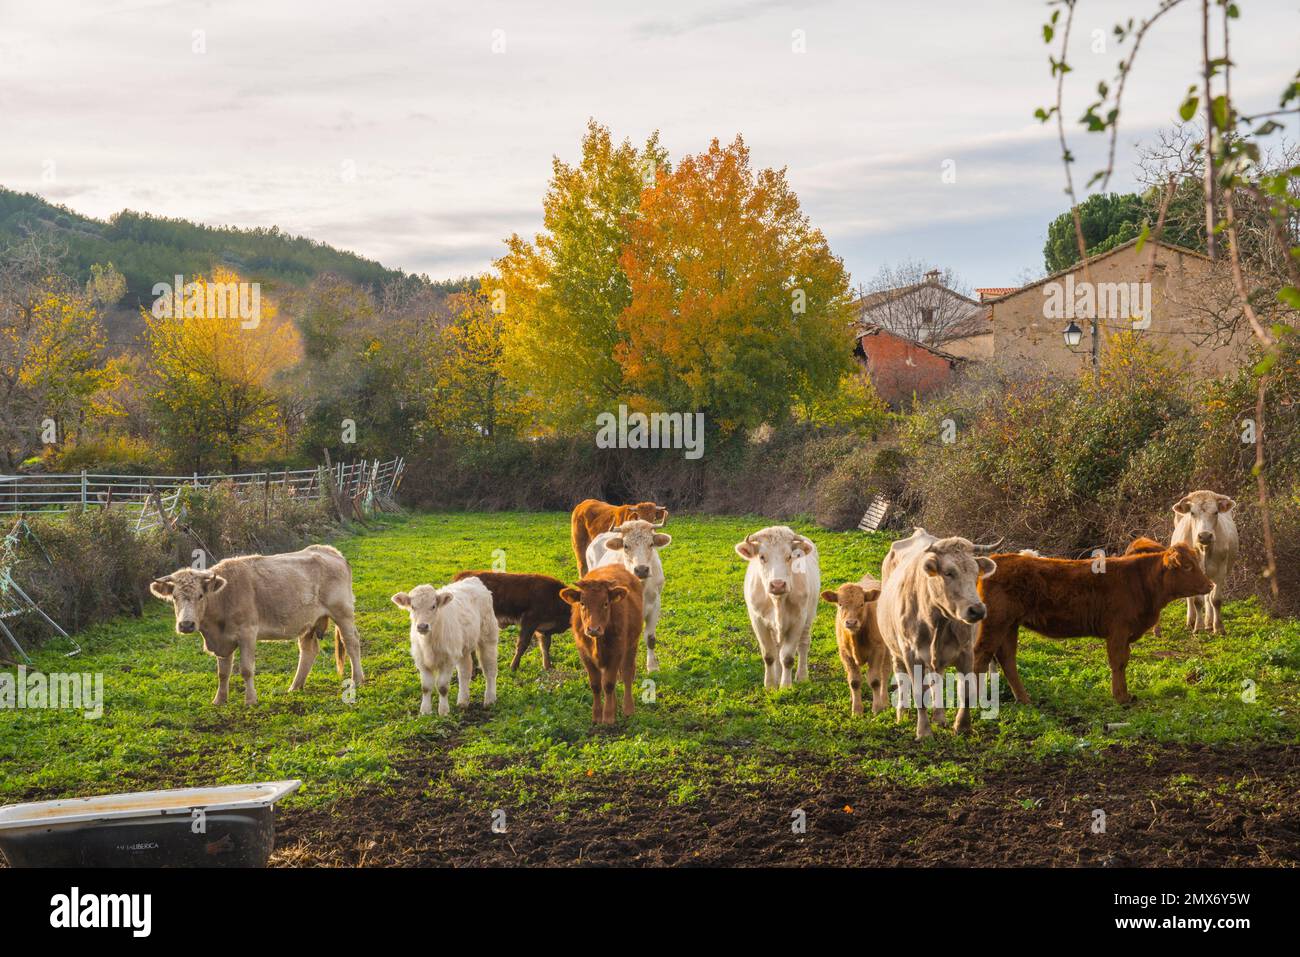 Herd of cows in a pen. Piñuecar, Madrid province, Spain. Stock Photo